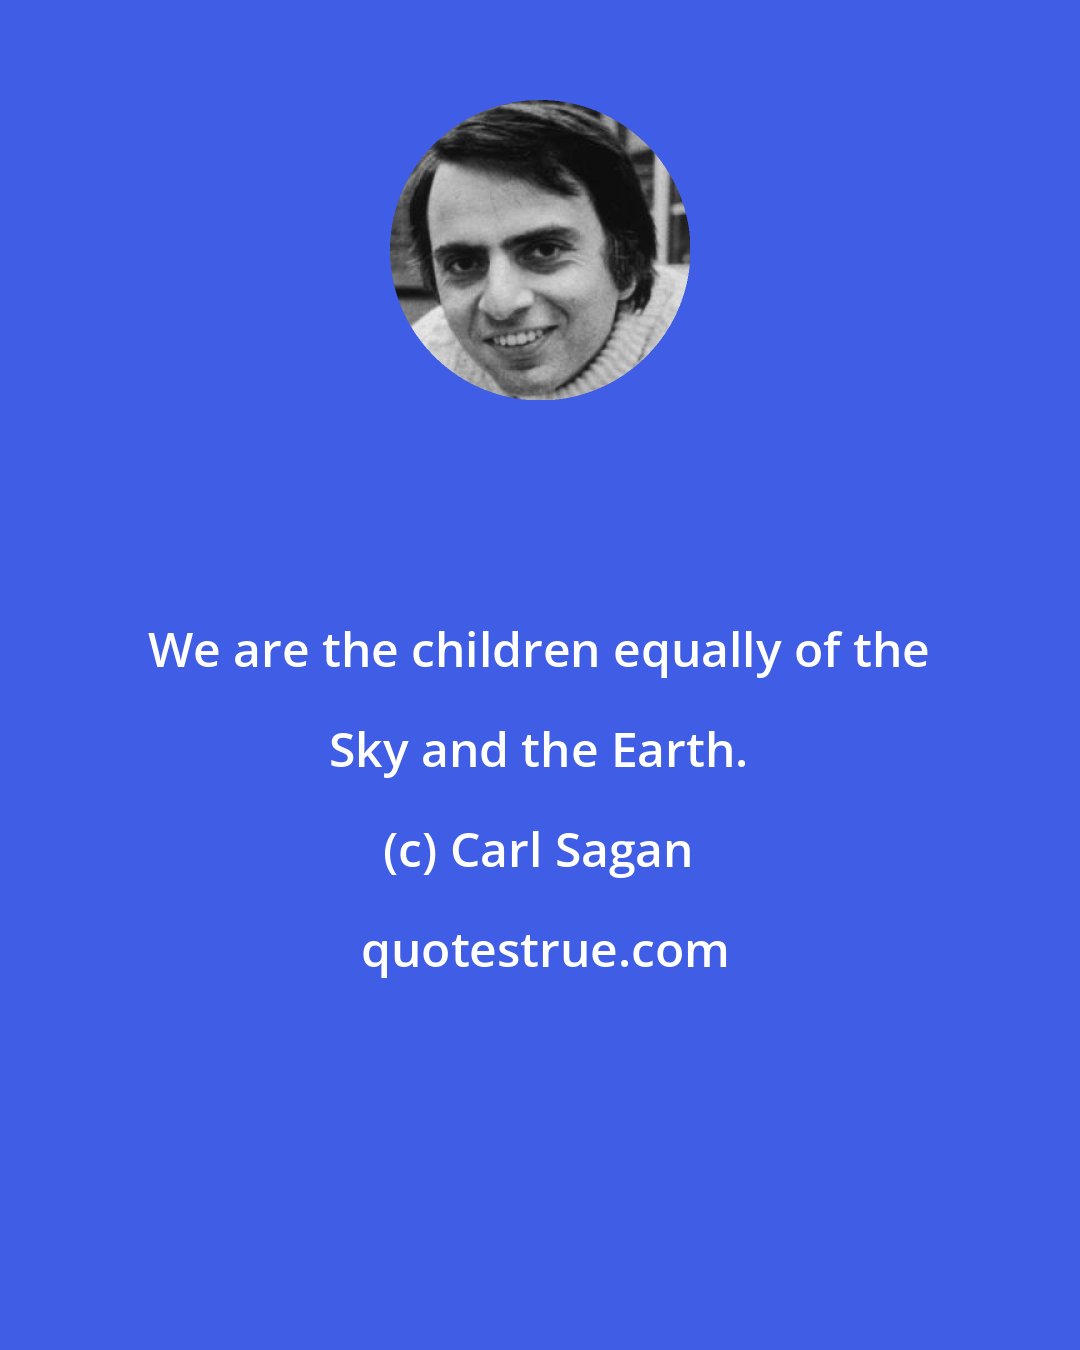 Carl Sagan: We are the children equally of the Sky and the Earth.